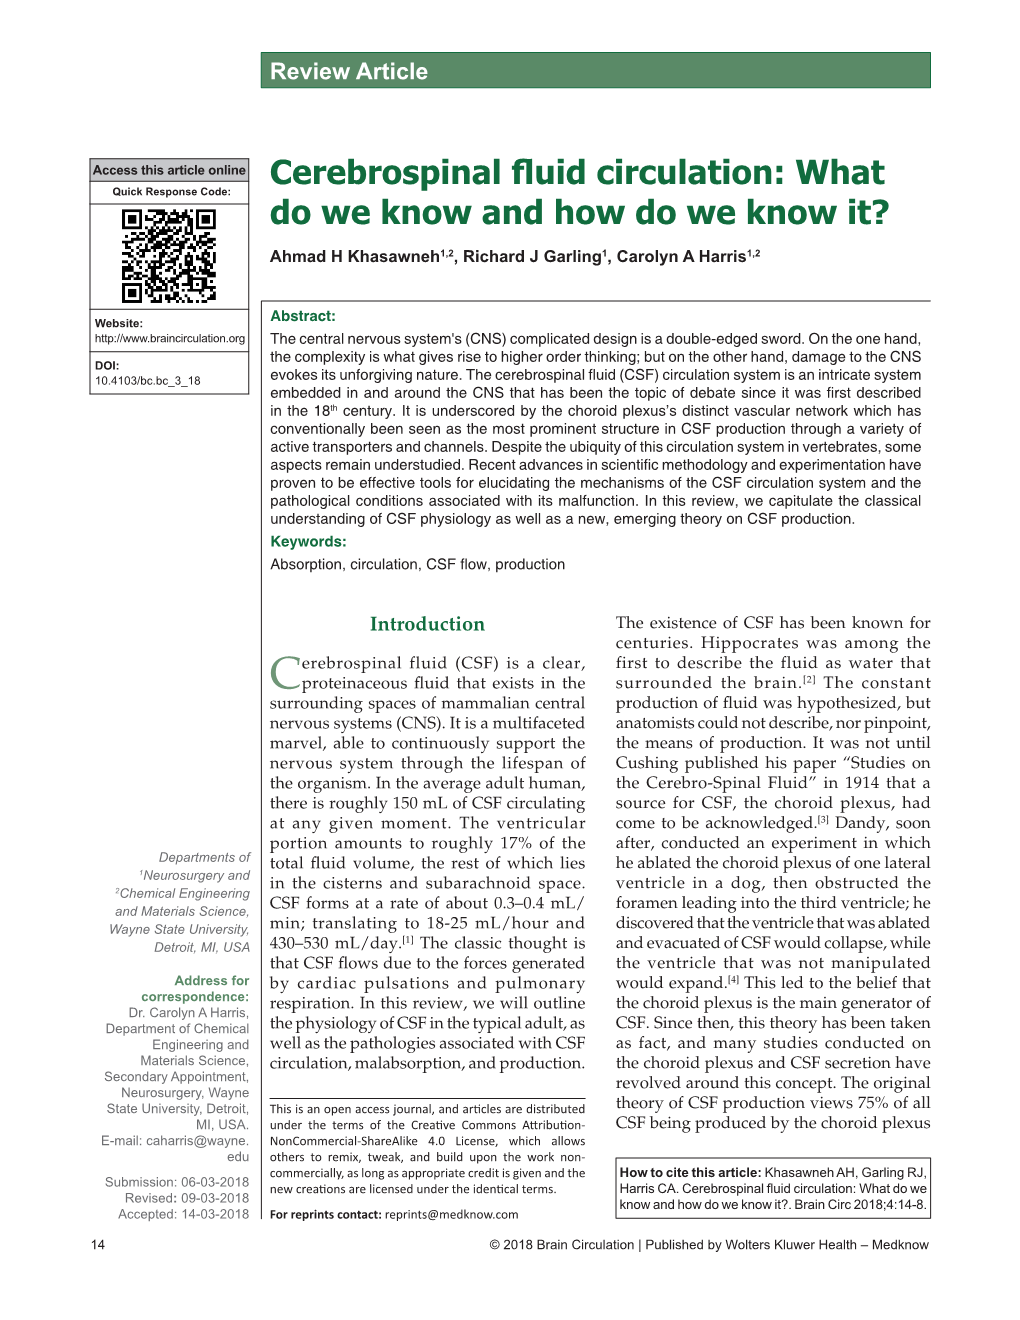 Cerebrospinal Fluid Circulation: What Do We Know and How Do We Know It? Ahmad H Khasawneh1,2, Richard J Garling1, Carolyn a Harris1,2